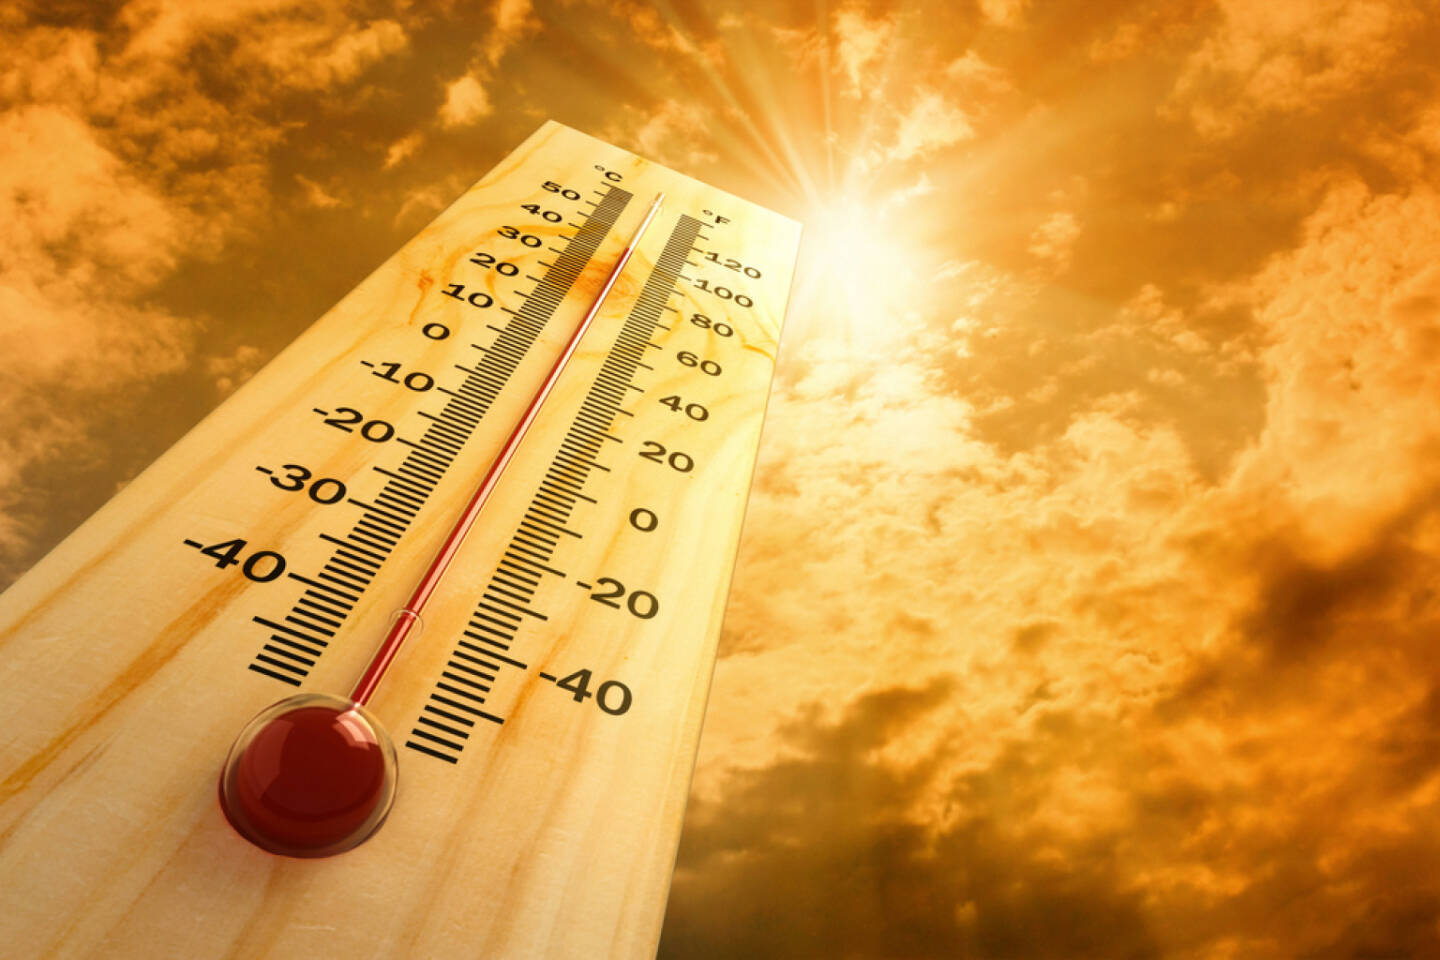 heiss, Hitze, Phase, heisse Phase, Temperatur, hitzig, http://www.shutterstock.com/de/pic-80404600/stock-photo-thermometer-in-the-sky-the-heat.html